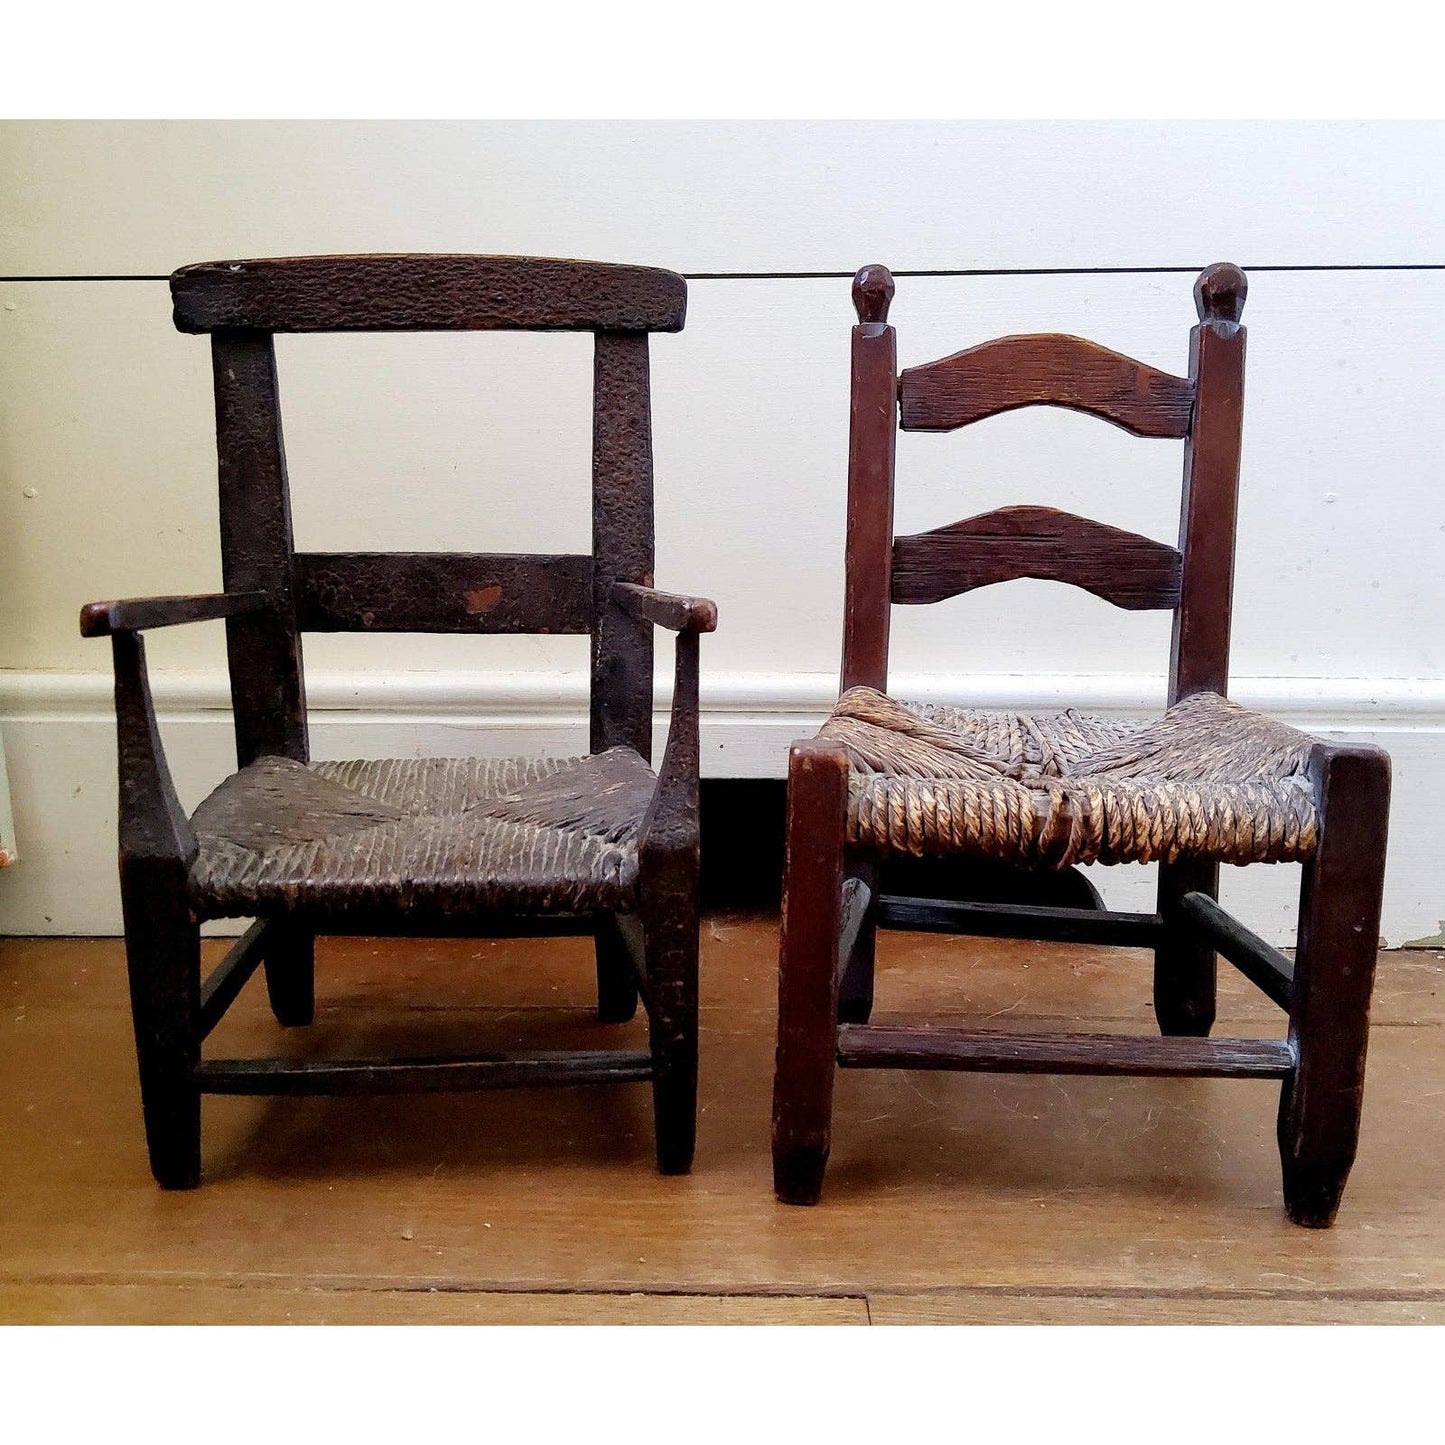 Pair of Rustic American Miniature Chairs Early 19th C